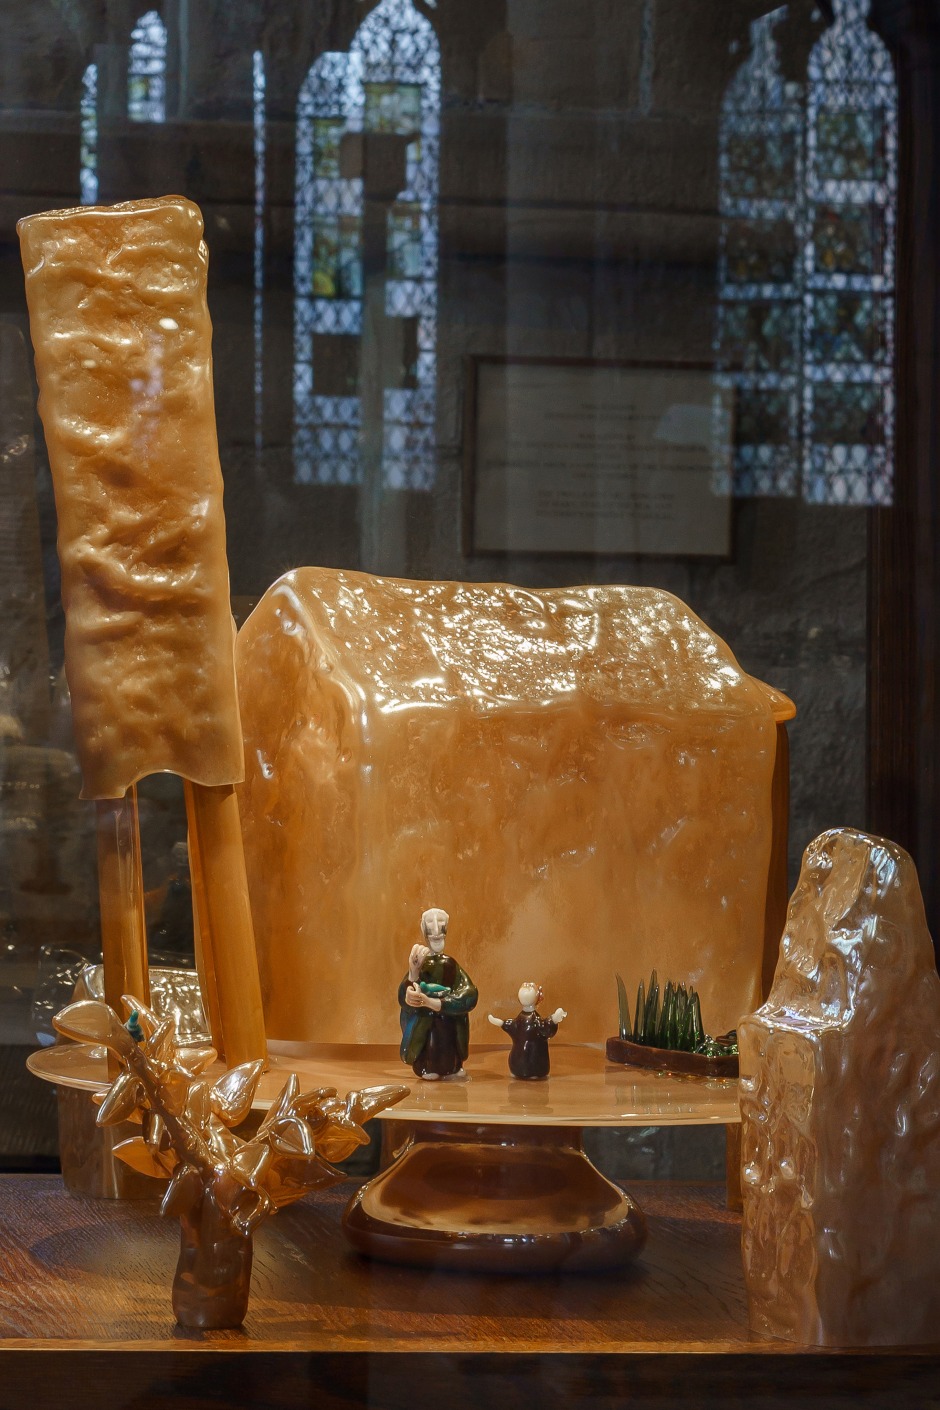 Installation view, Monster Chetwynd, Galilee Chapel at Durham Cathedral, Sunderland Culture, Glass Exchange Tour, 26 March - 11 September 2022  © Monster Chetwynd. Courtesy Sunderland Culture / National Glass Centre  Photo: David Wood at Sunderland Culture